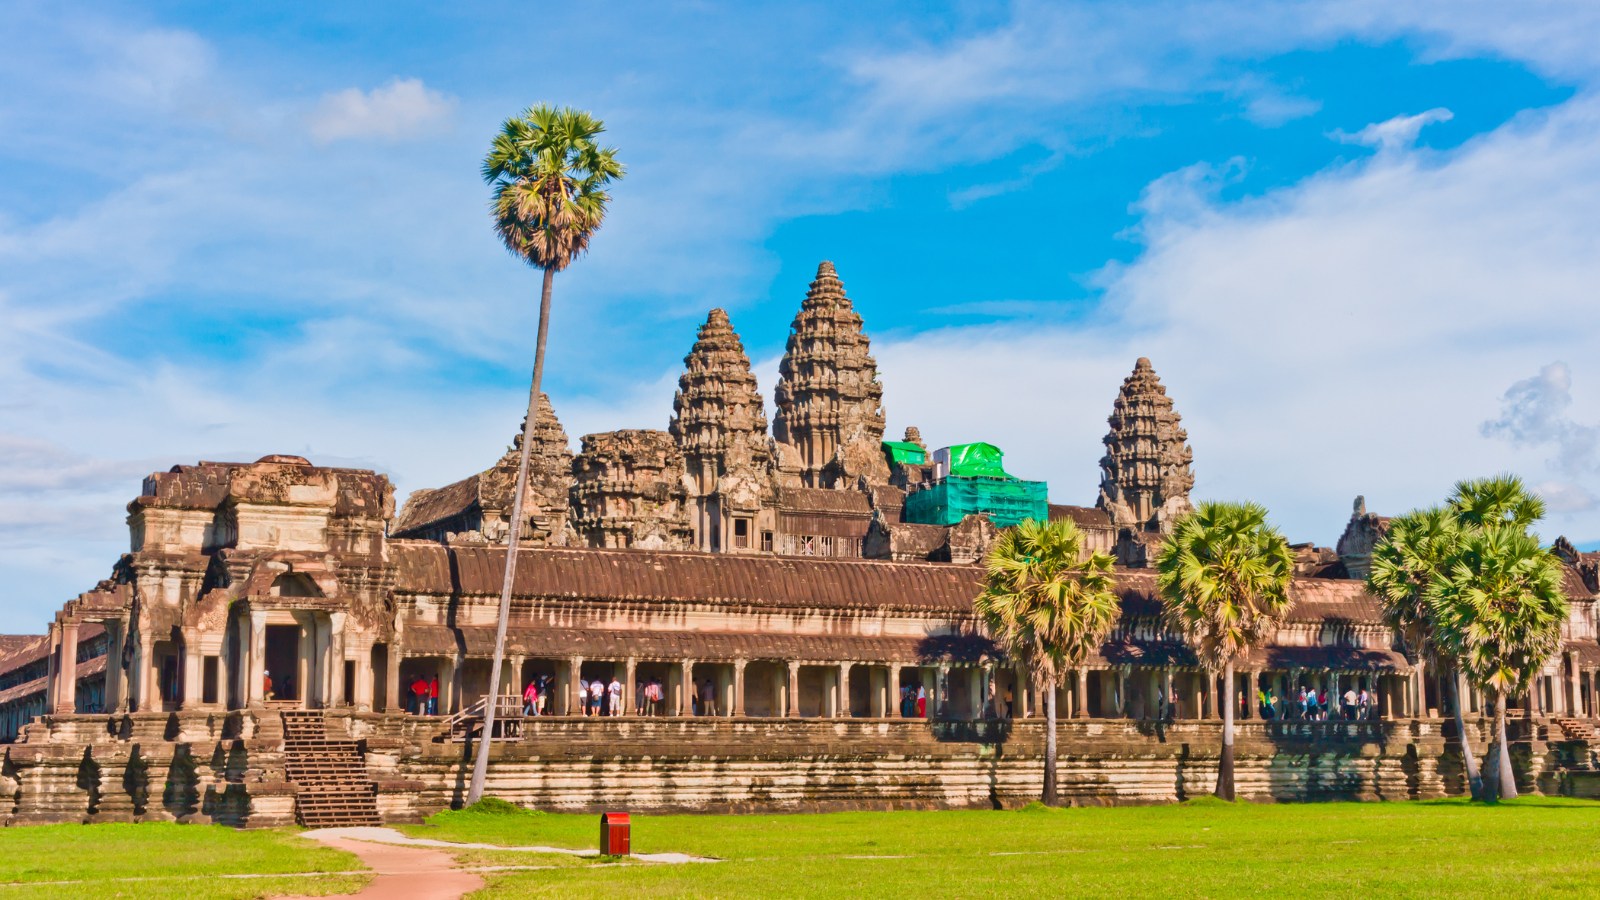 <p>Cambodia is swiftly becoming a top choice for spiritual and wellness tourism, thanks to Angkor Wat, the most significant spiritual and architectural marvel in the world. Originally built in the early 12th century, this beautiful ancient city complex has a fascinating history and cultural significance.</p><p>The religious heritage site attracts pilgrims and spiritual seekers from around the world who come to pay homage to its sacred relics, explore its spiritual symbolism, and experience its tranquil atmosphere.  Also, its serene ambiance and awe-inspiring surroundings provide an ideal environment for inner reflection and spiritual contemplation.</p>